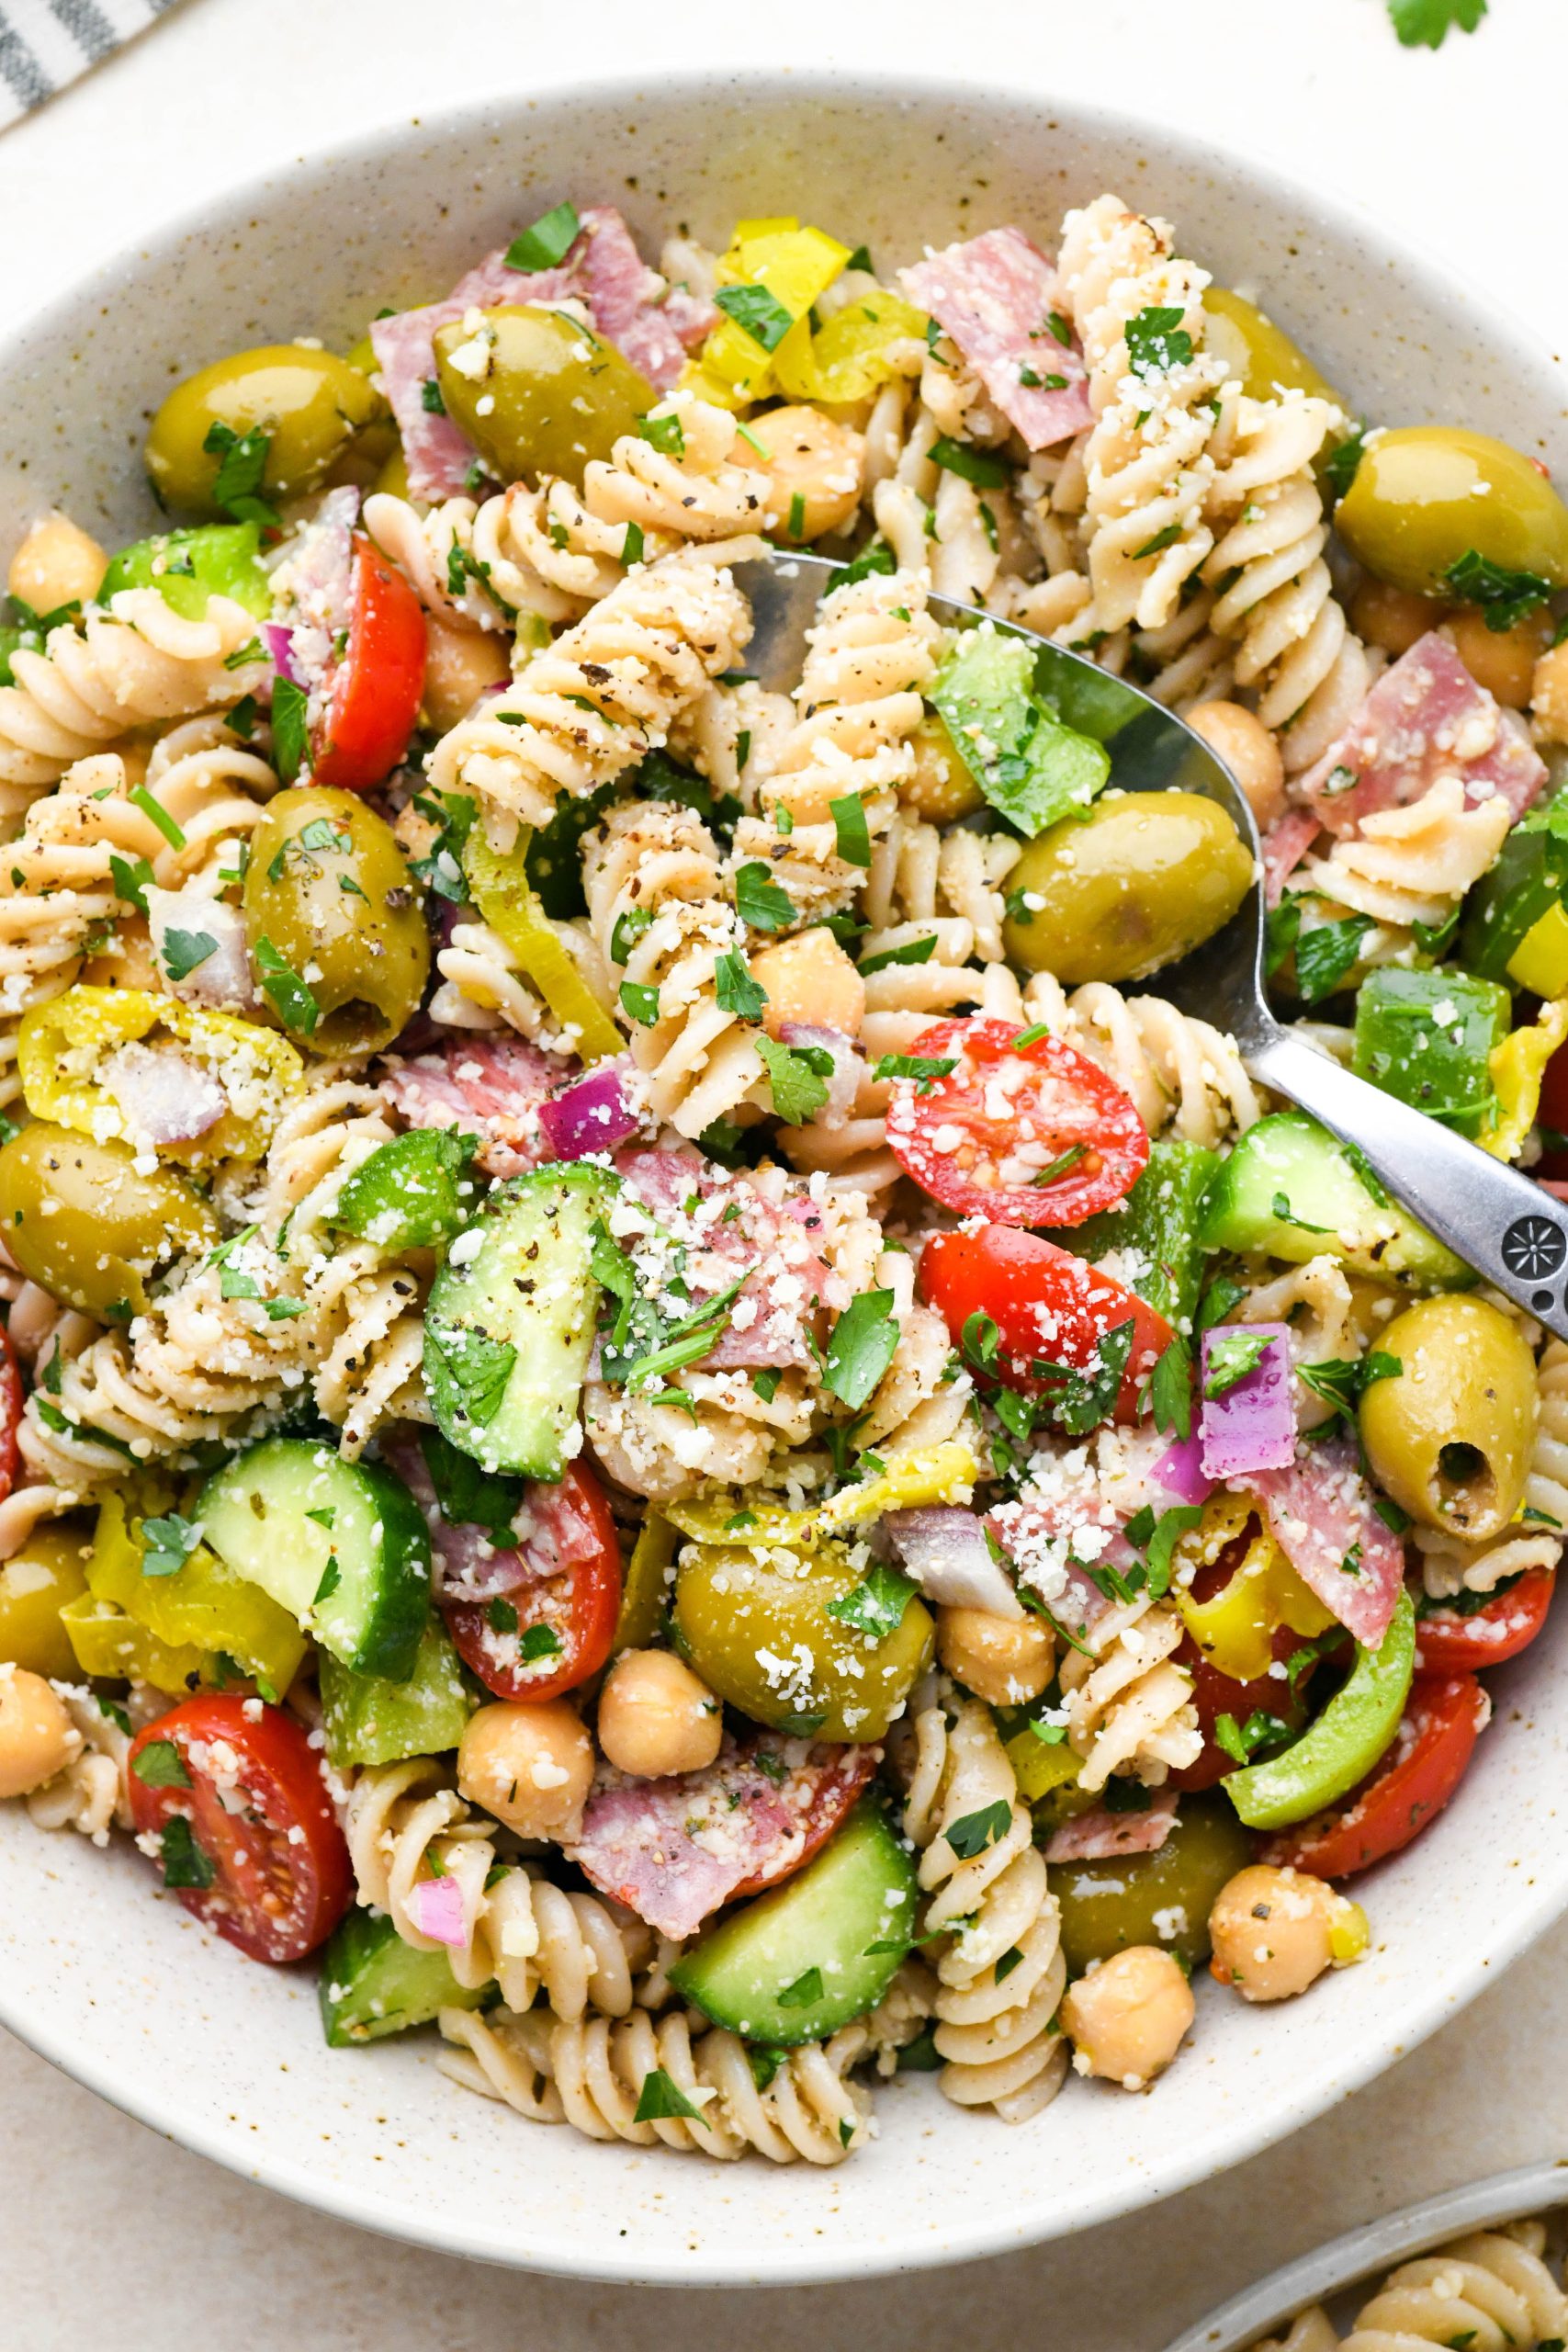 Close up image of easy gluten free Italian pasta salad with fresh ingredients like tomatoes, cucumbers, red onion, olives, herbs, and parmesan cheese.